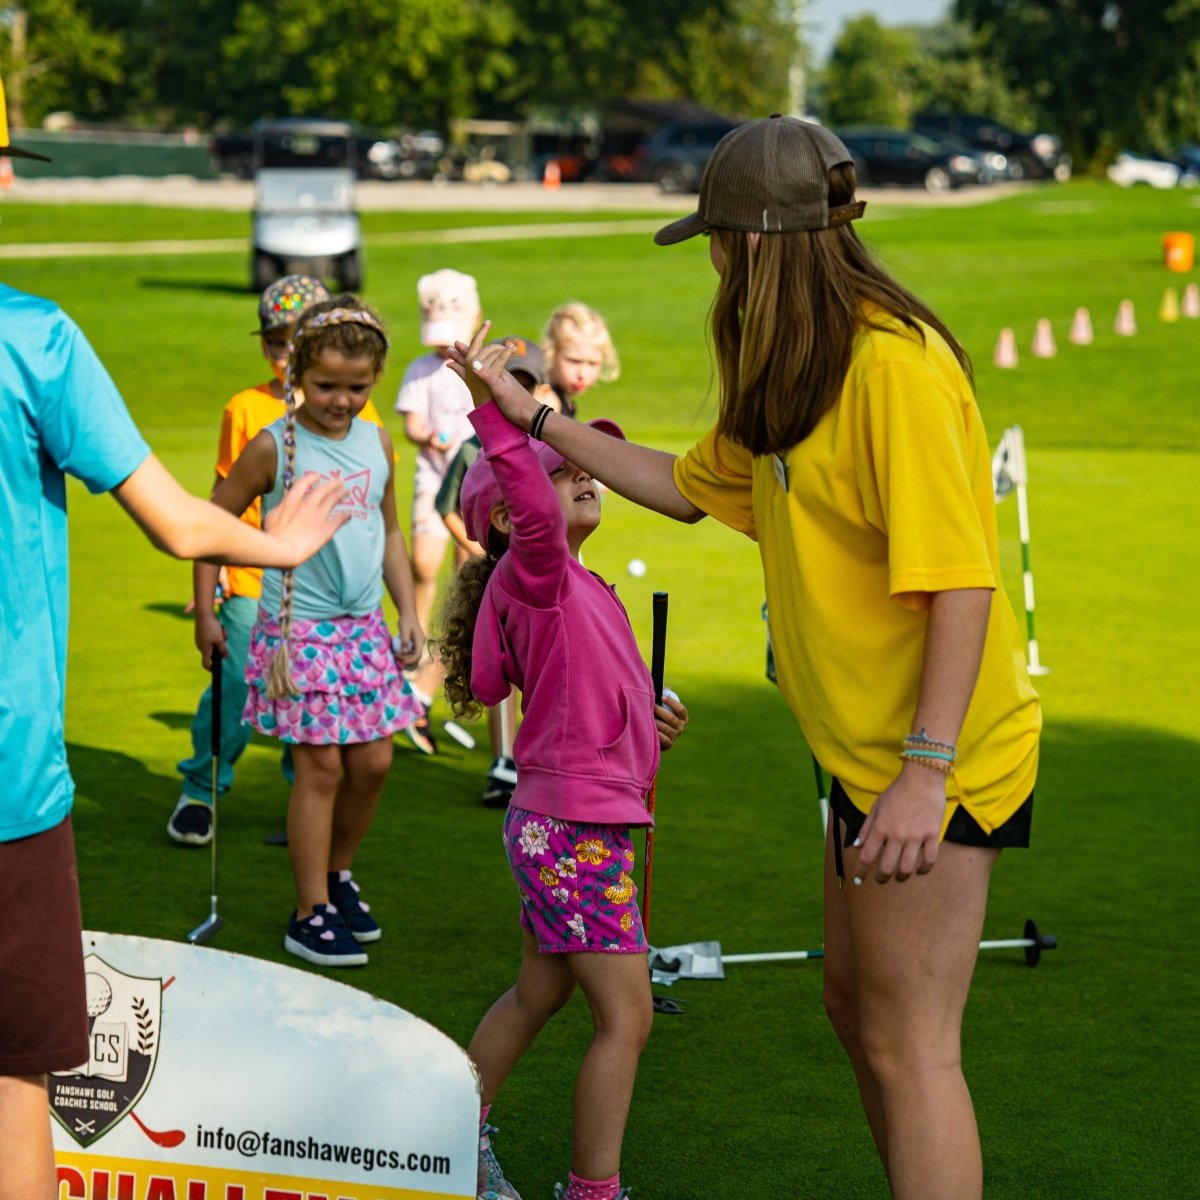 Kids at a golf summer camp in London, Ontario